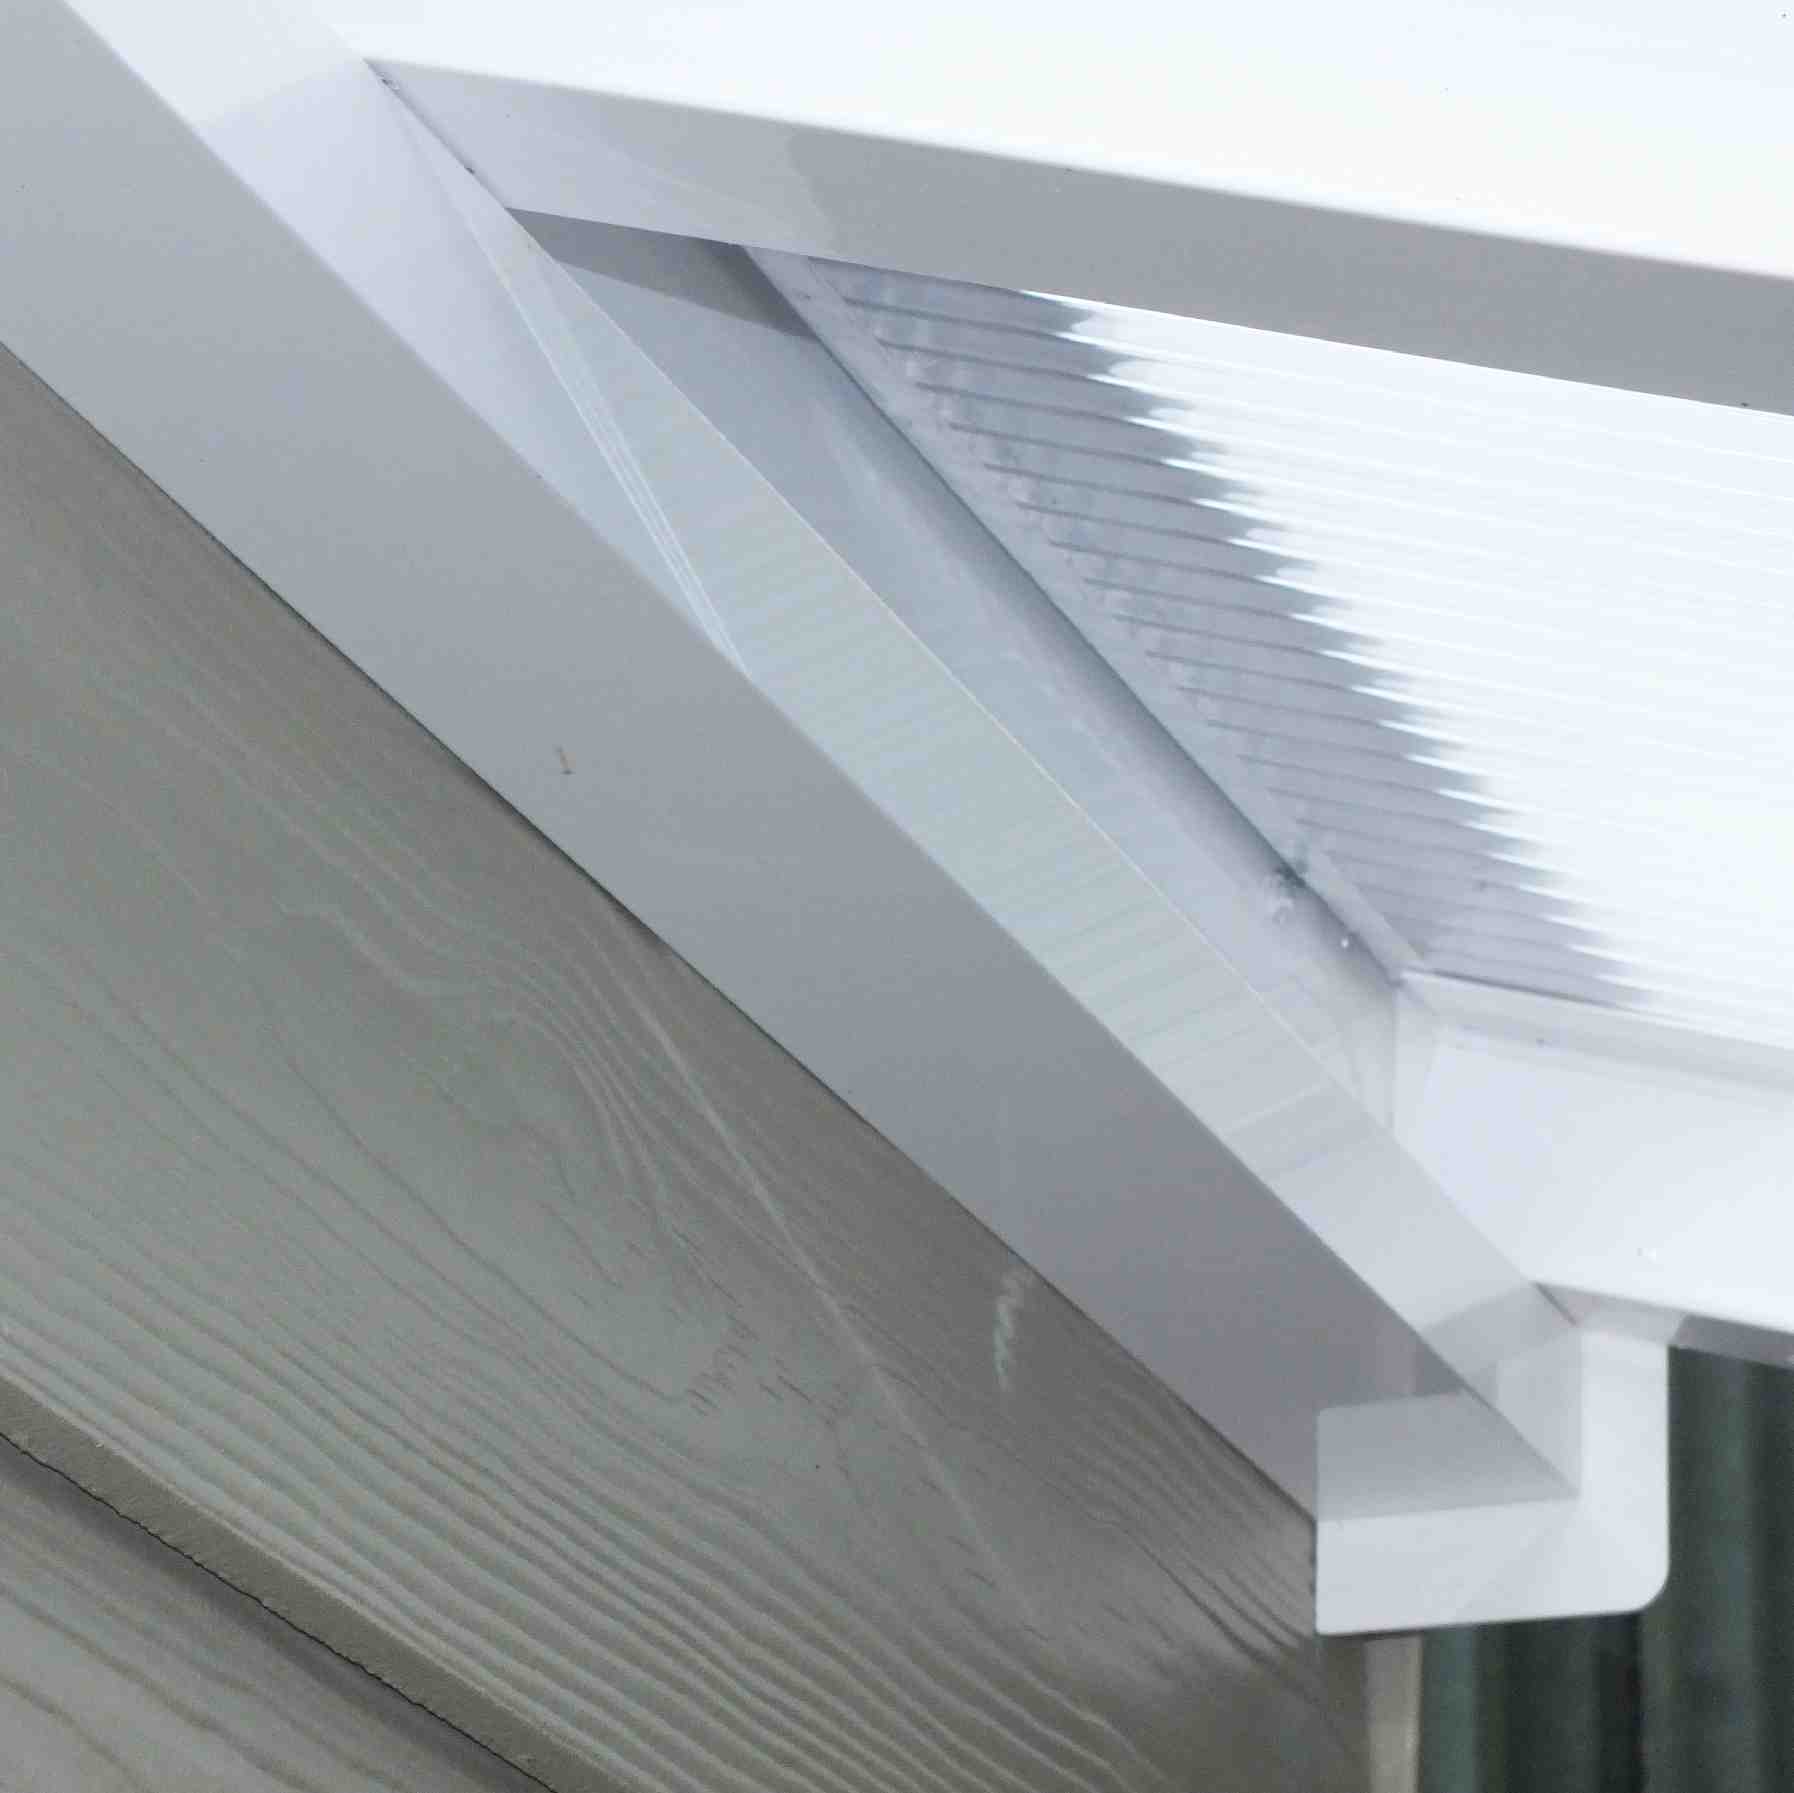 Great deals on Omega Verandah White with 6mm Glass Clear Plate Polycarbonate Glazing - 8.4m (W) x 2.5m (P), (4) Supporting Posts